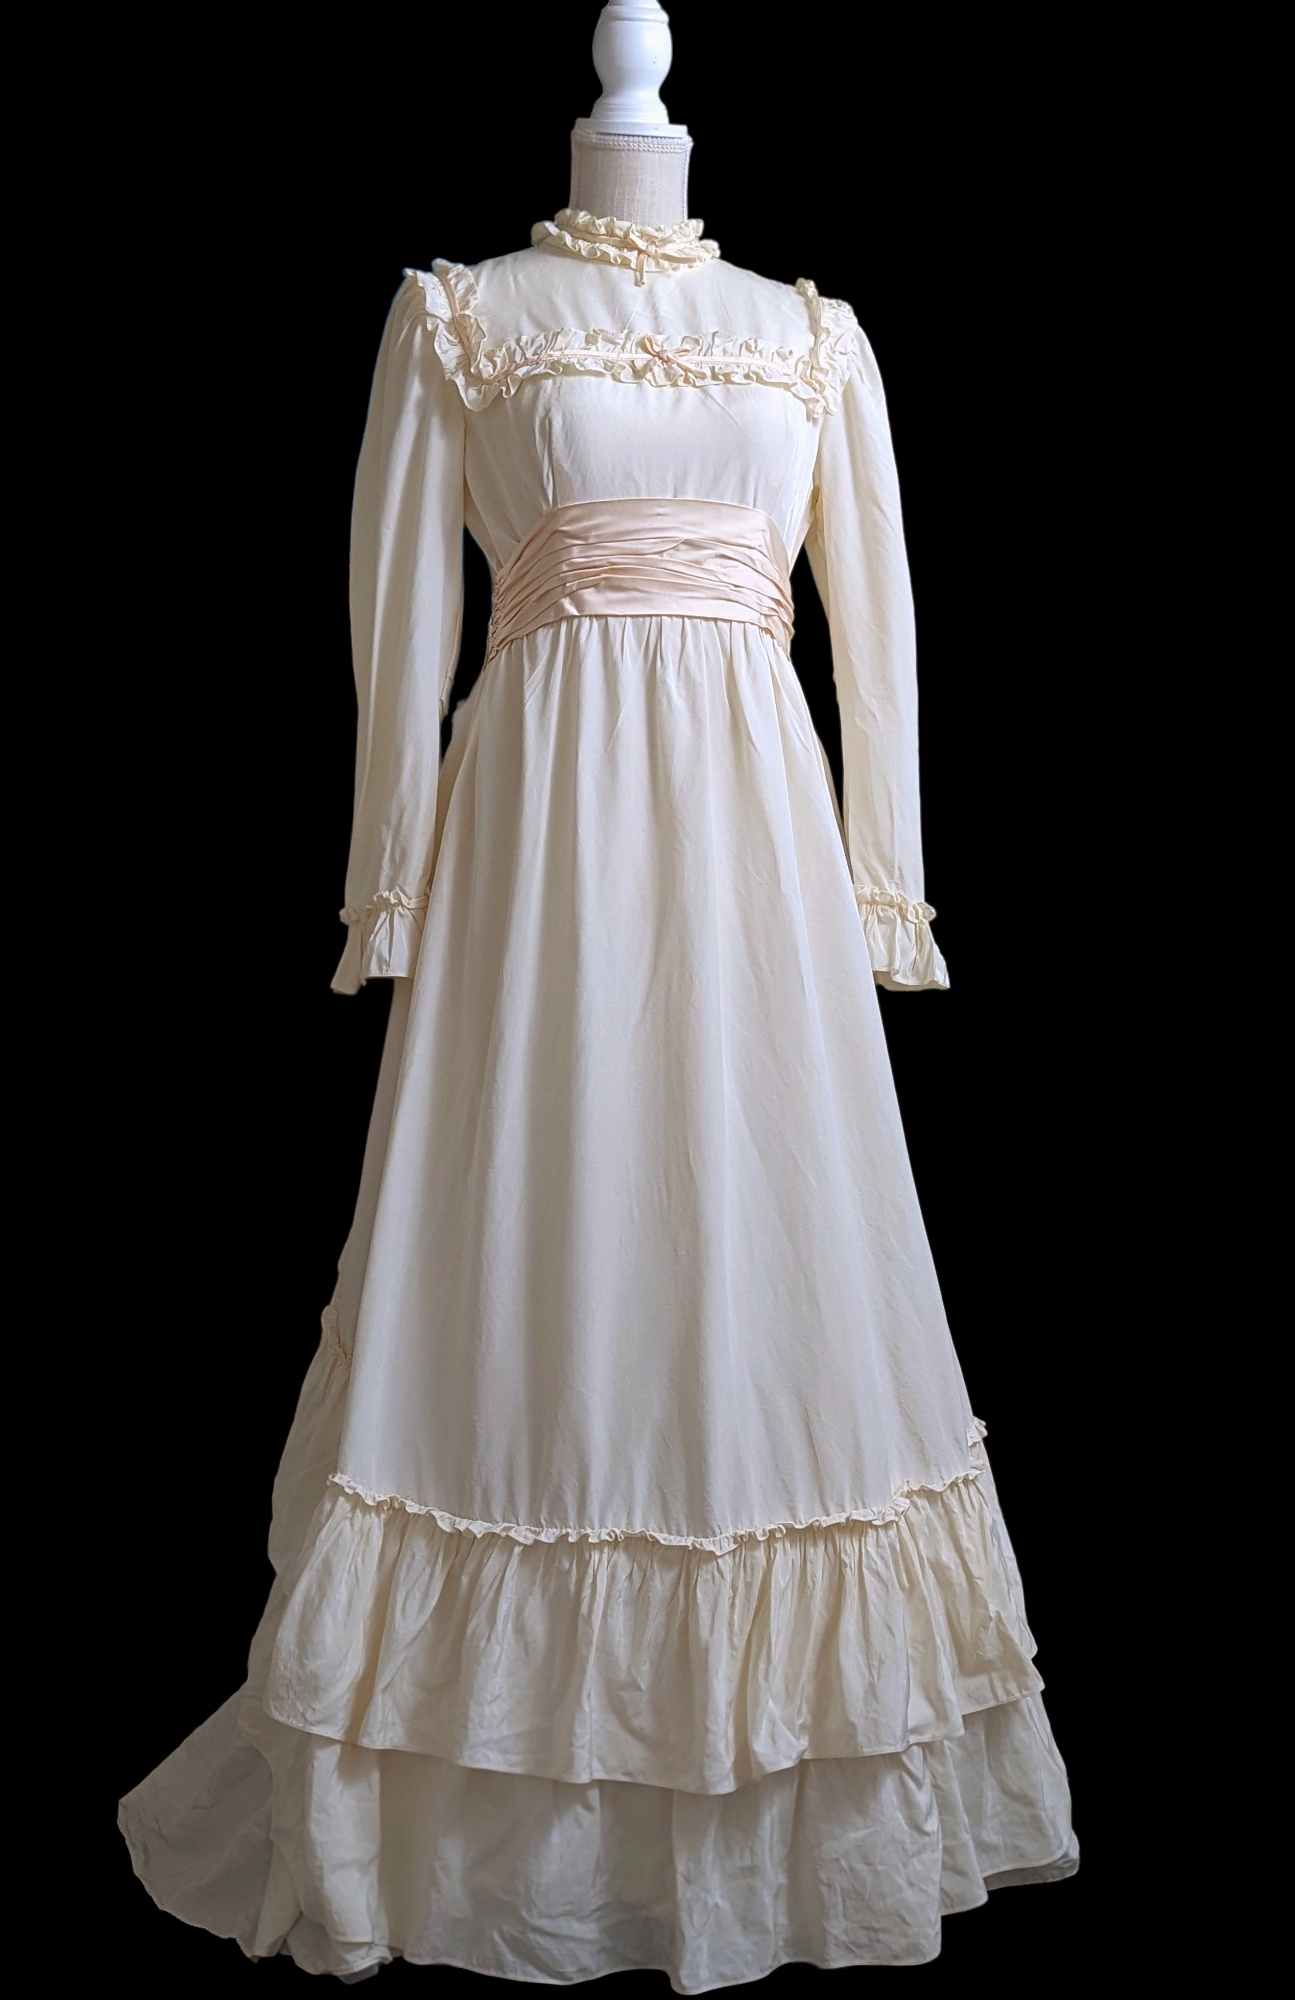 1960s Emma Domb Wedding Dress in a Prairie Cottagecore Style with Pink Satin Bows, Trimmings and Soft Ruffles